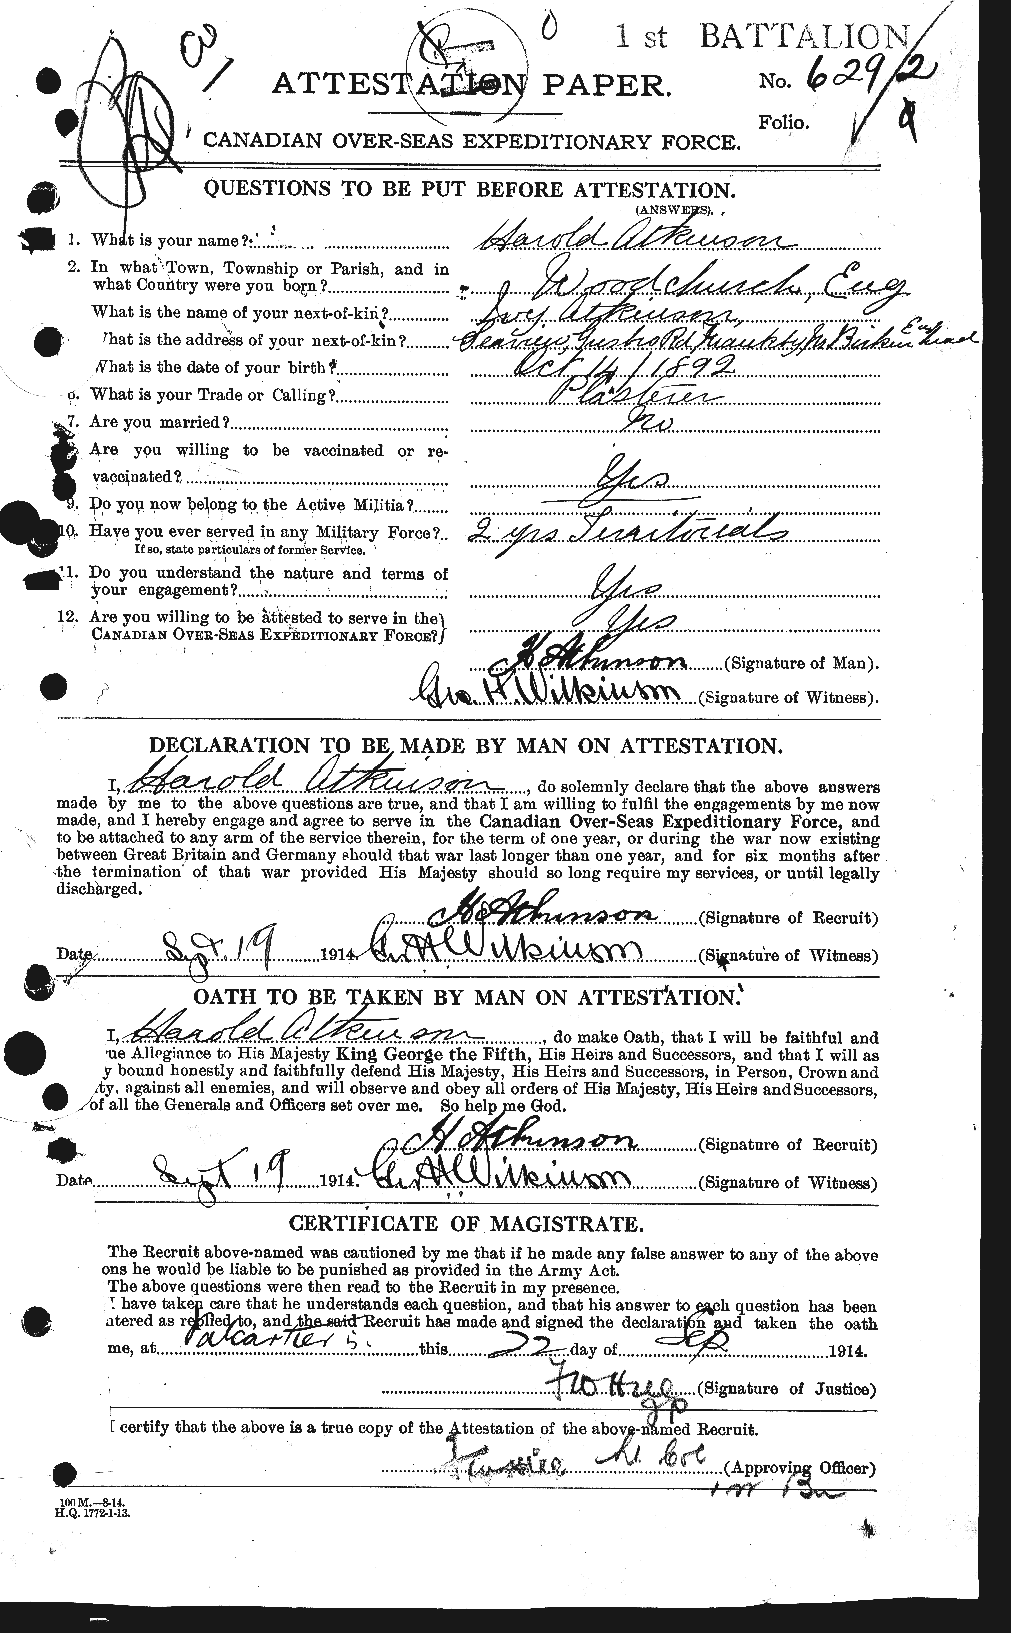 Personnel Records of the First World War - CEF 217390a